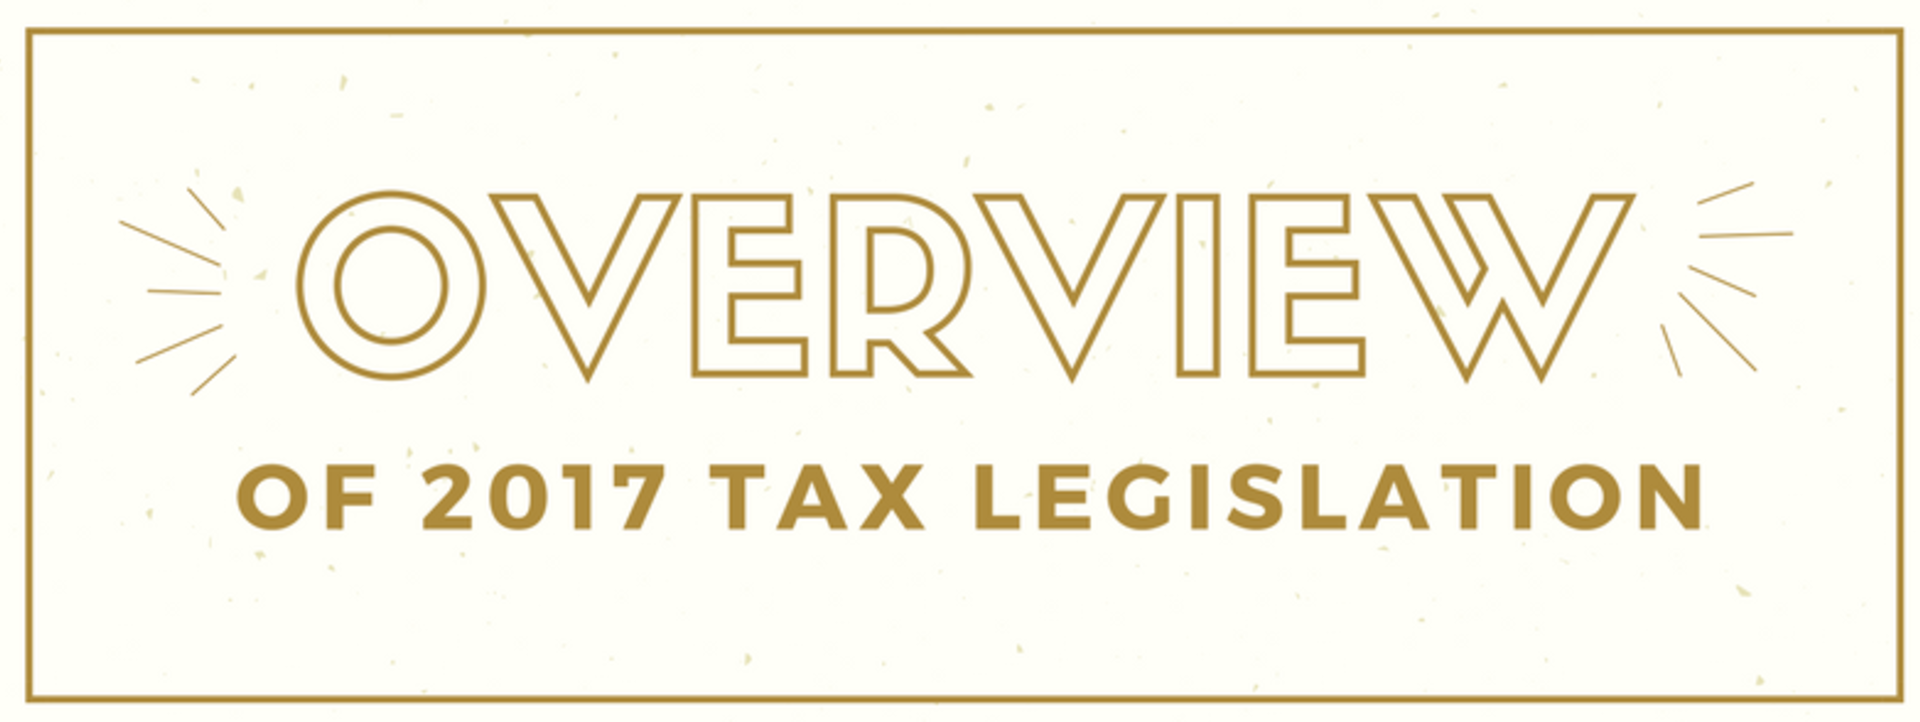 An Overview of the 2017 Tax Legislation